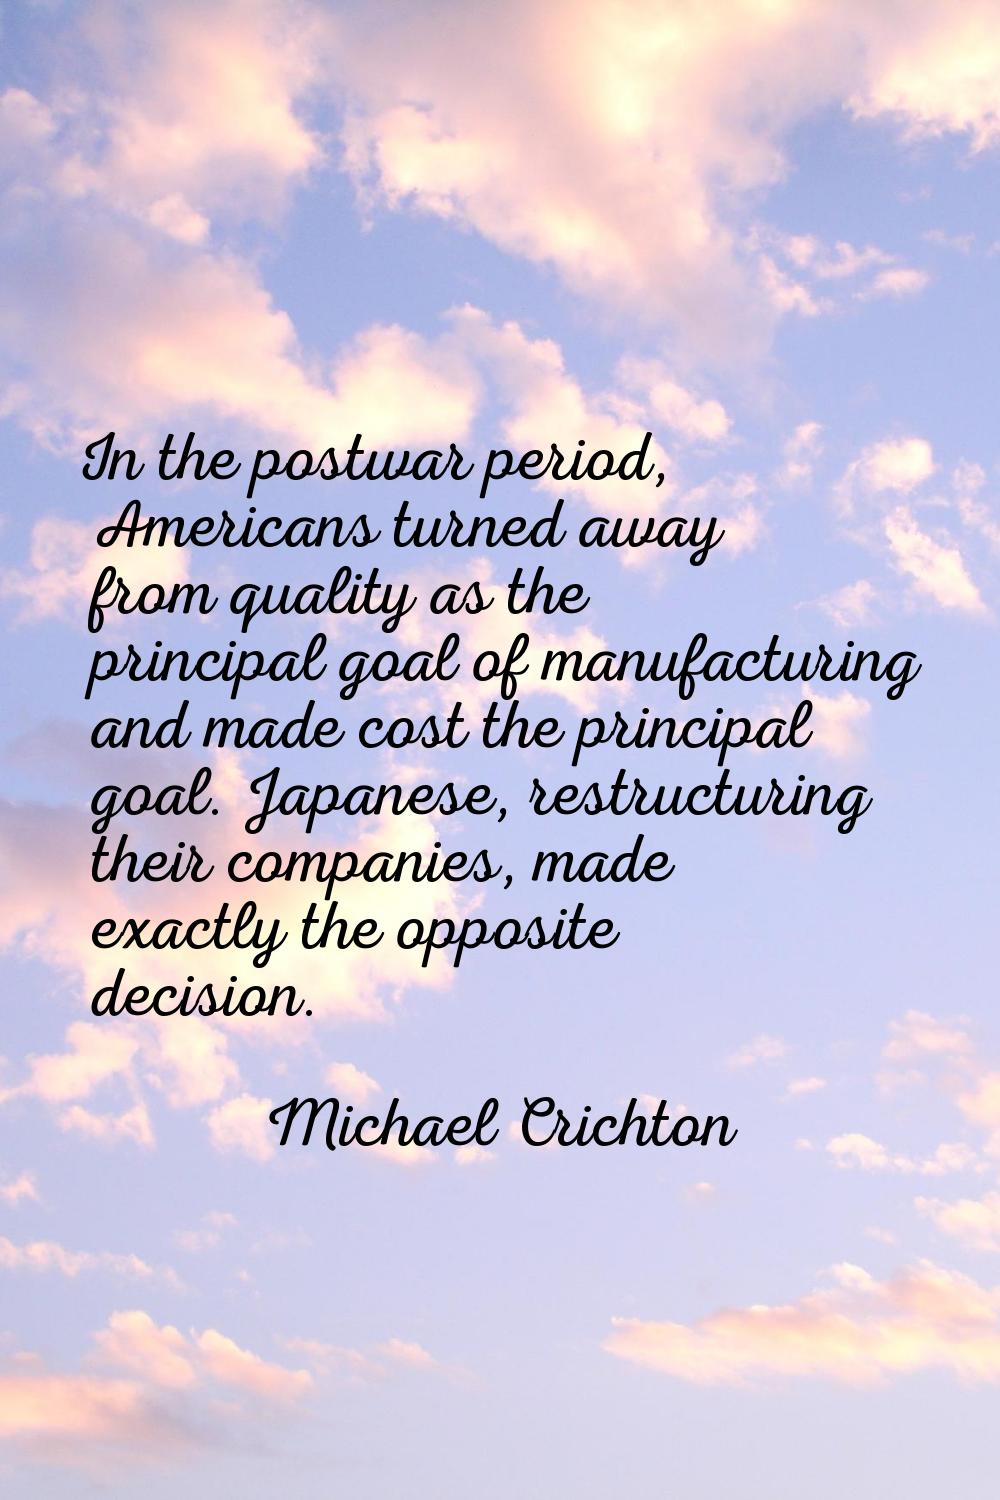 In the postwar period, Americans turned away from quality as the principal goal of manufacturing an